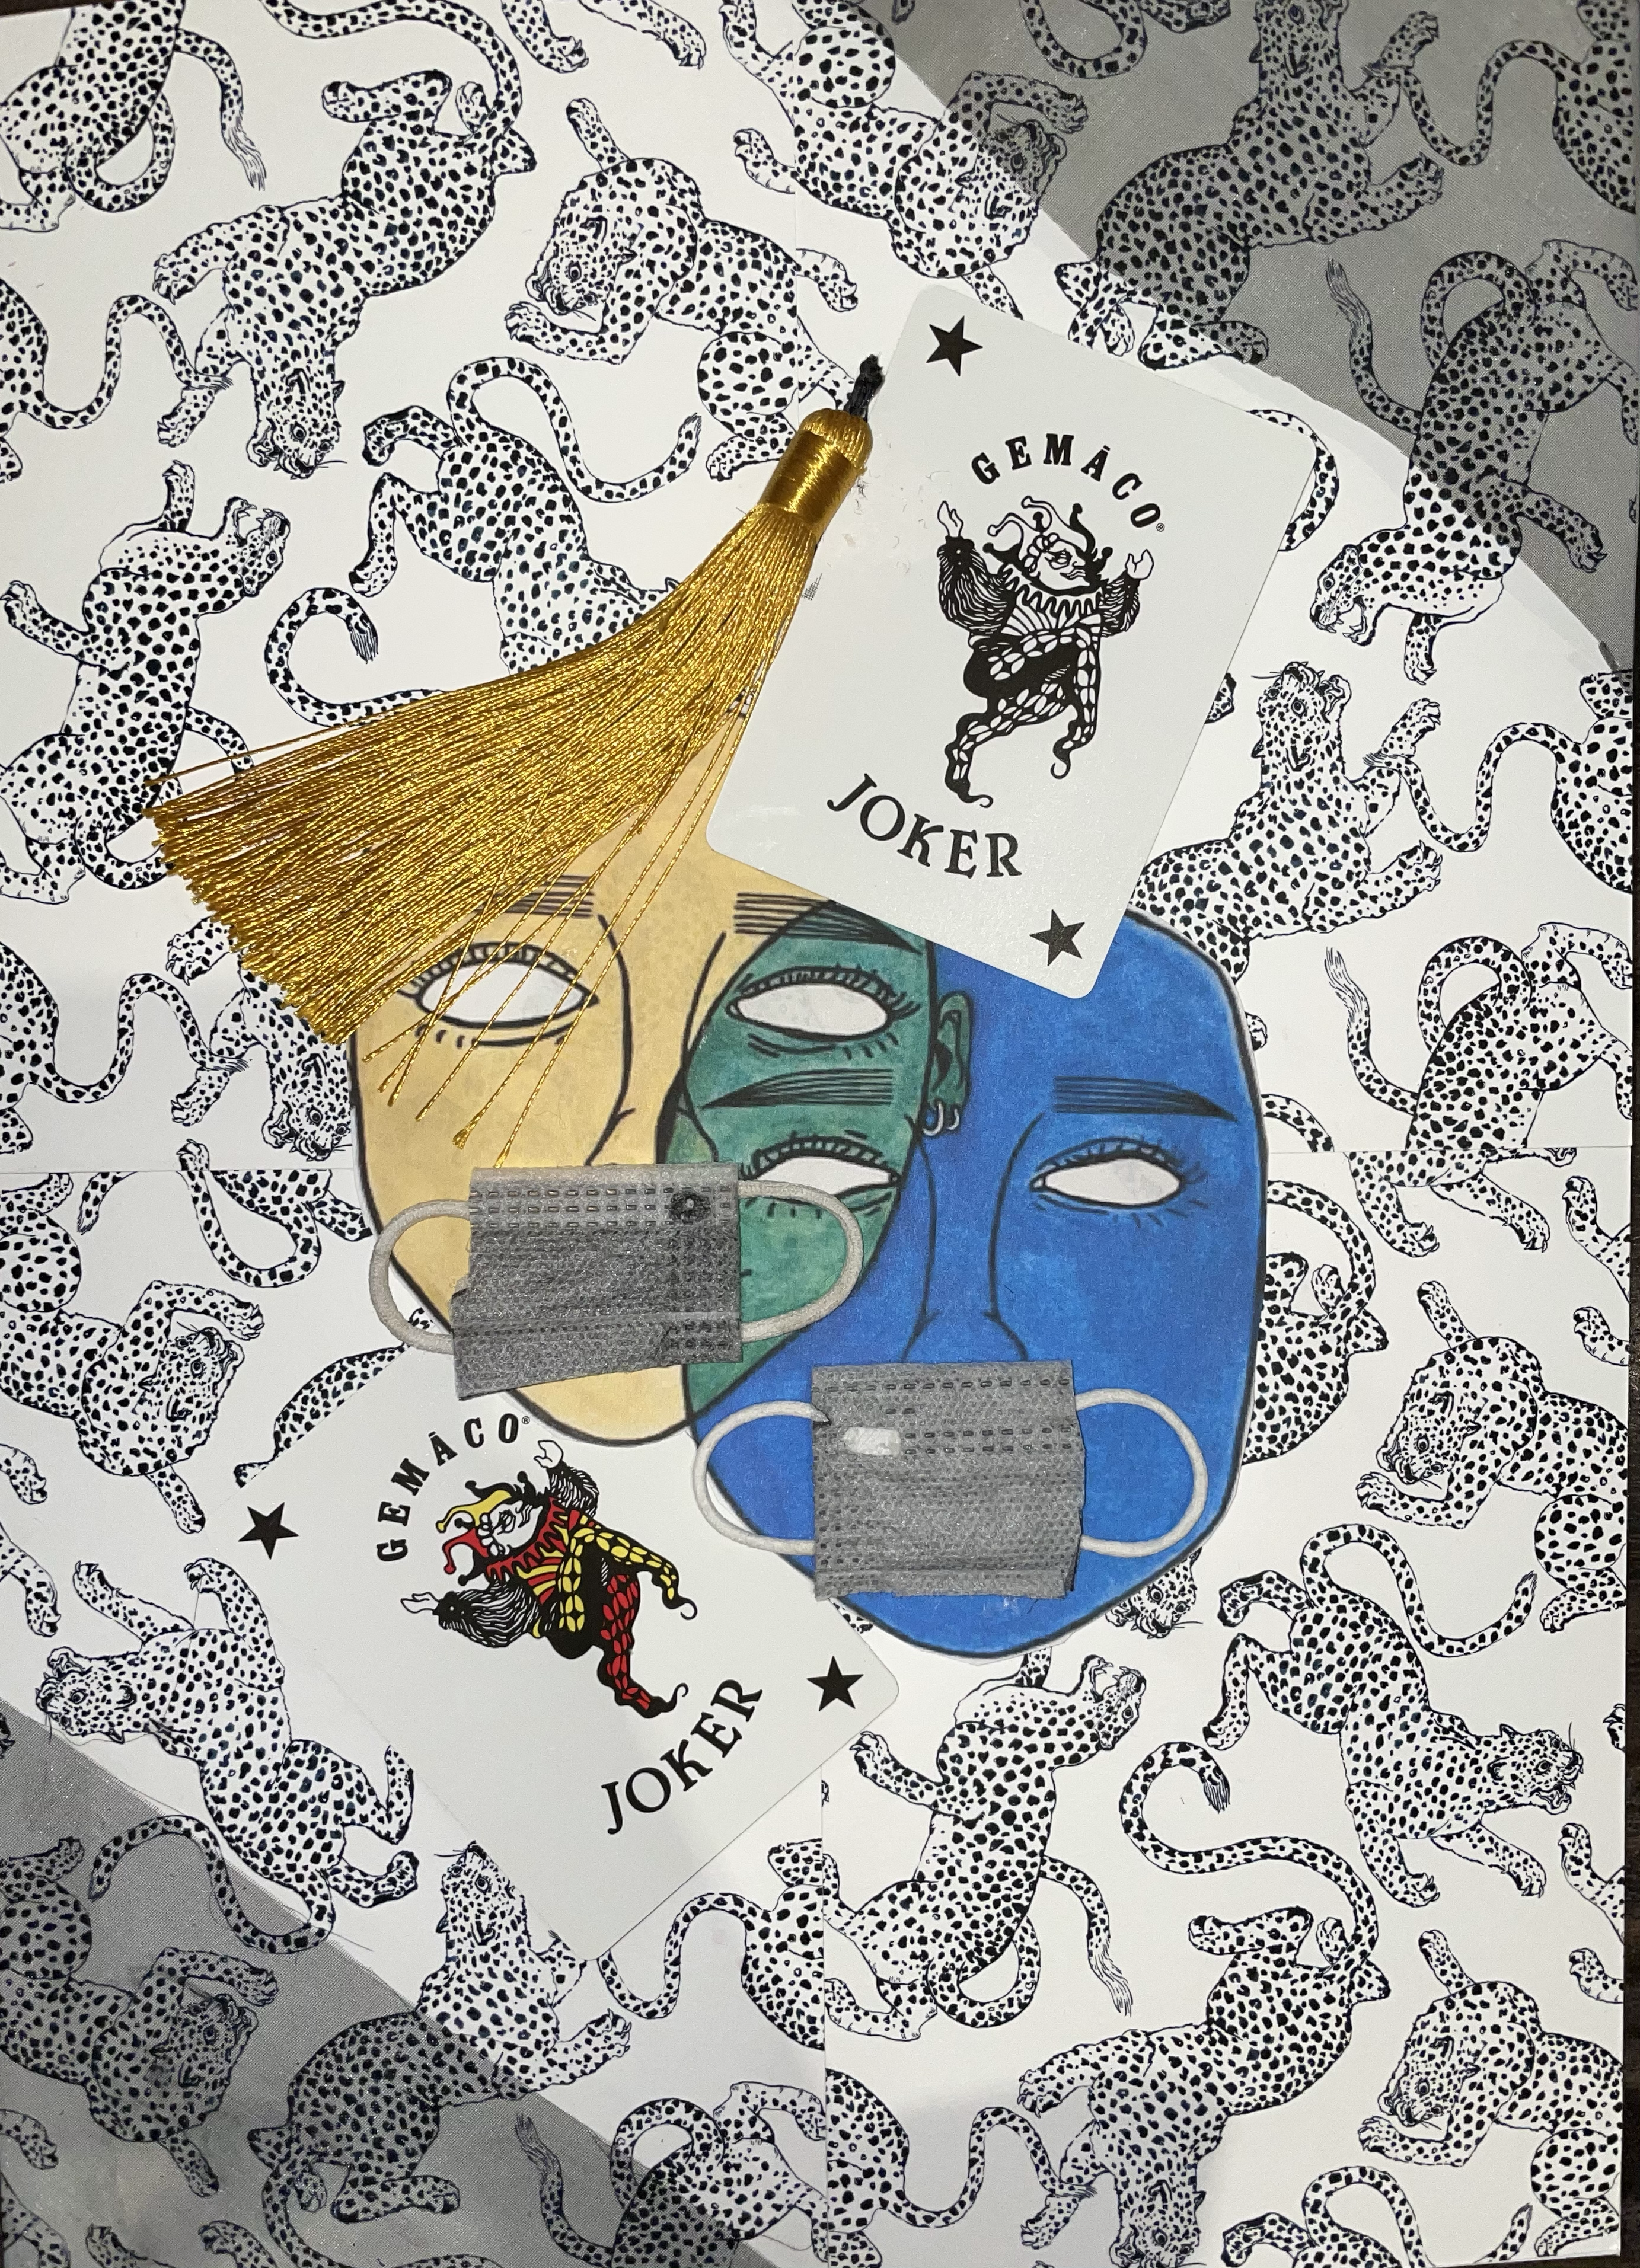 A drawing of two theatrical masks with pieces of cloth face masks layered over their mouths. 